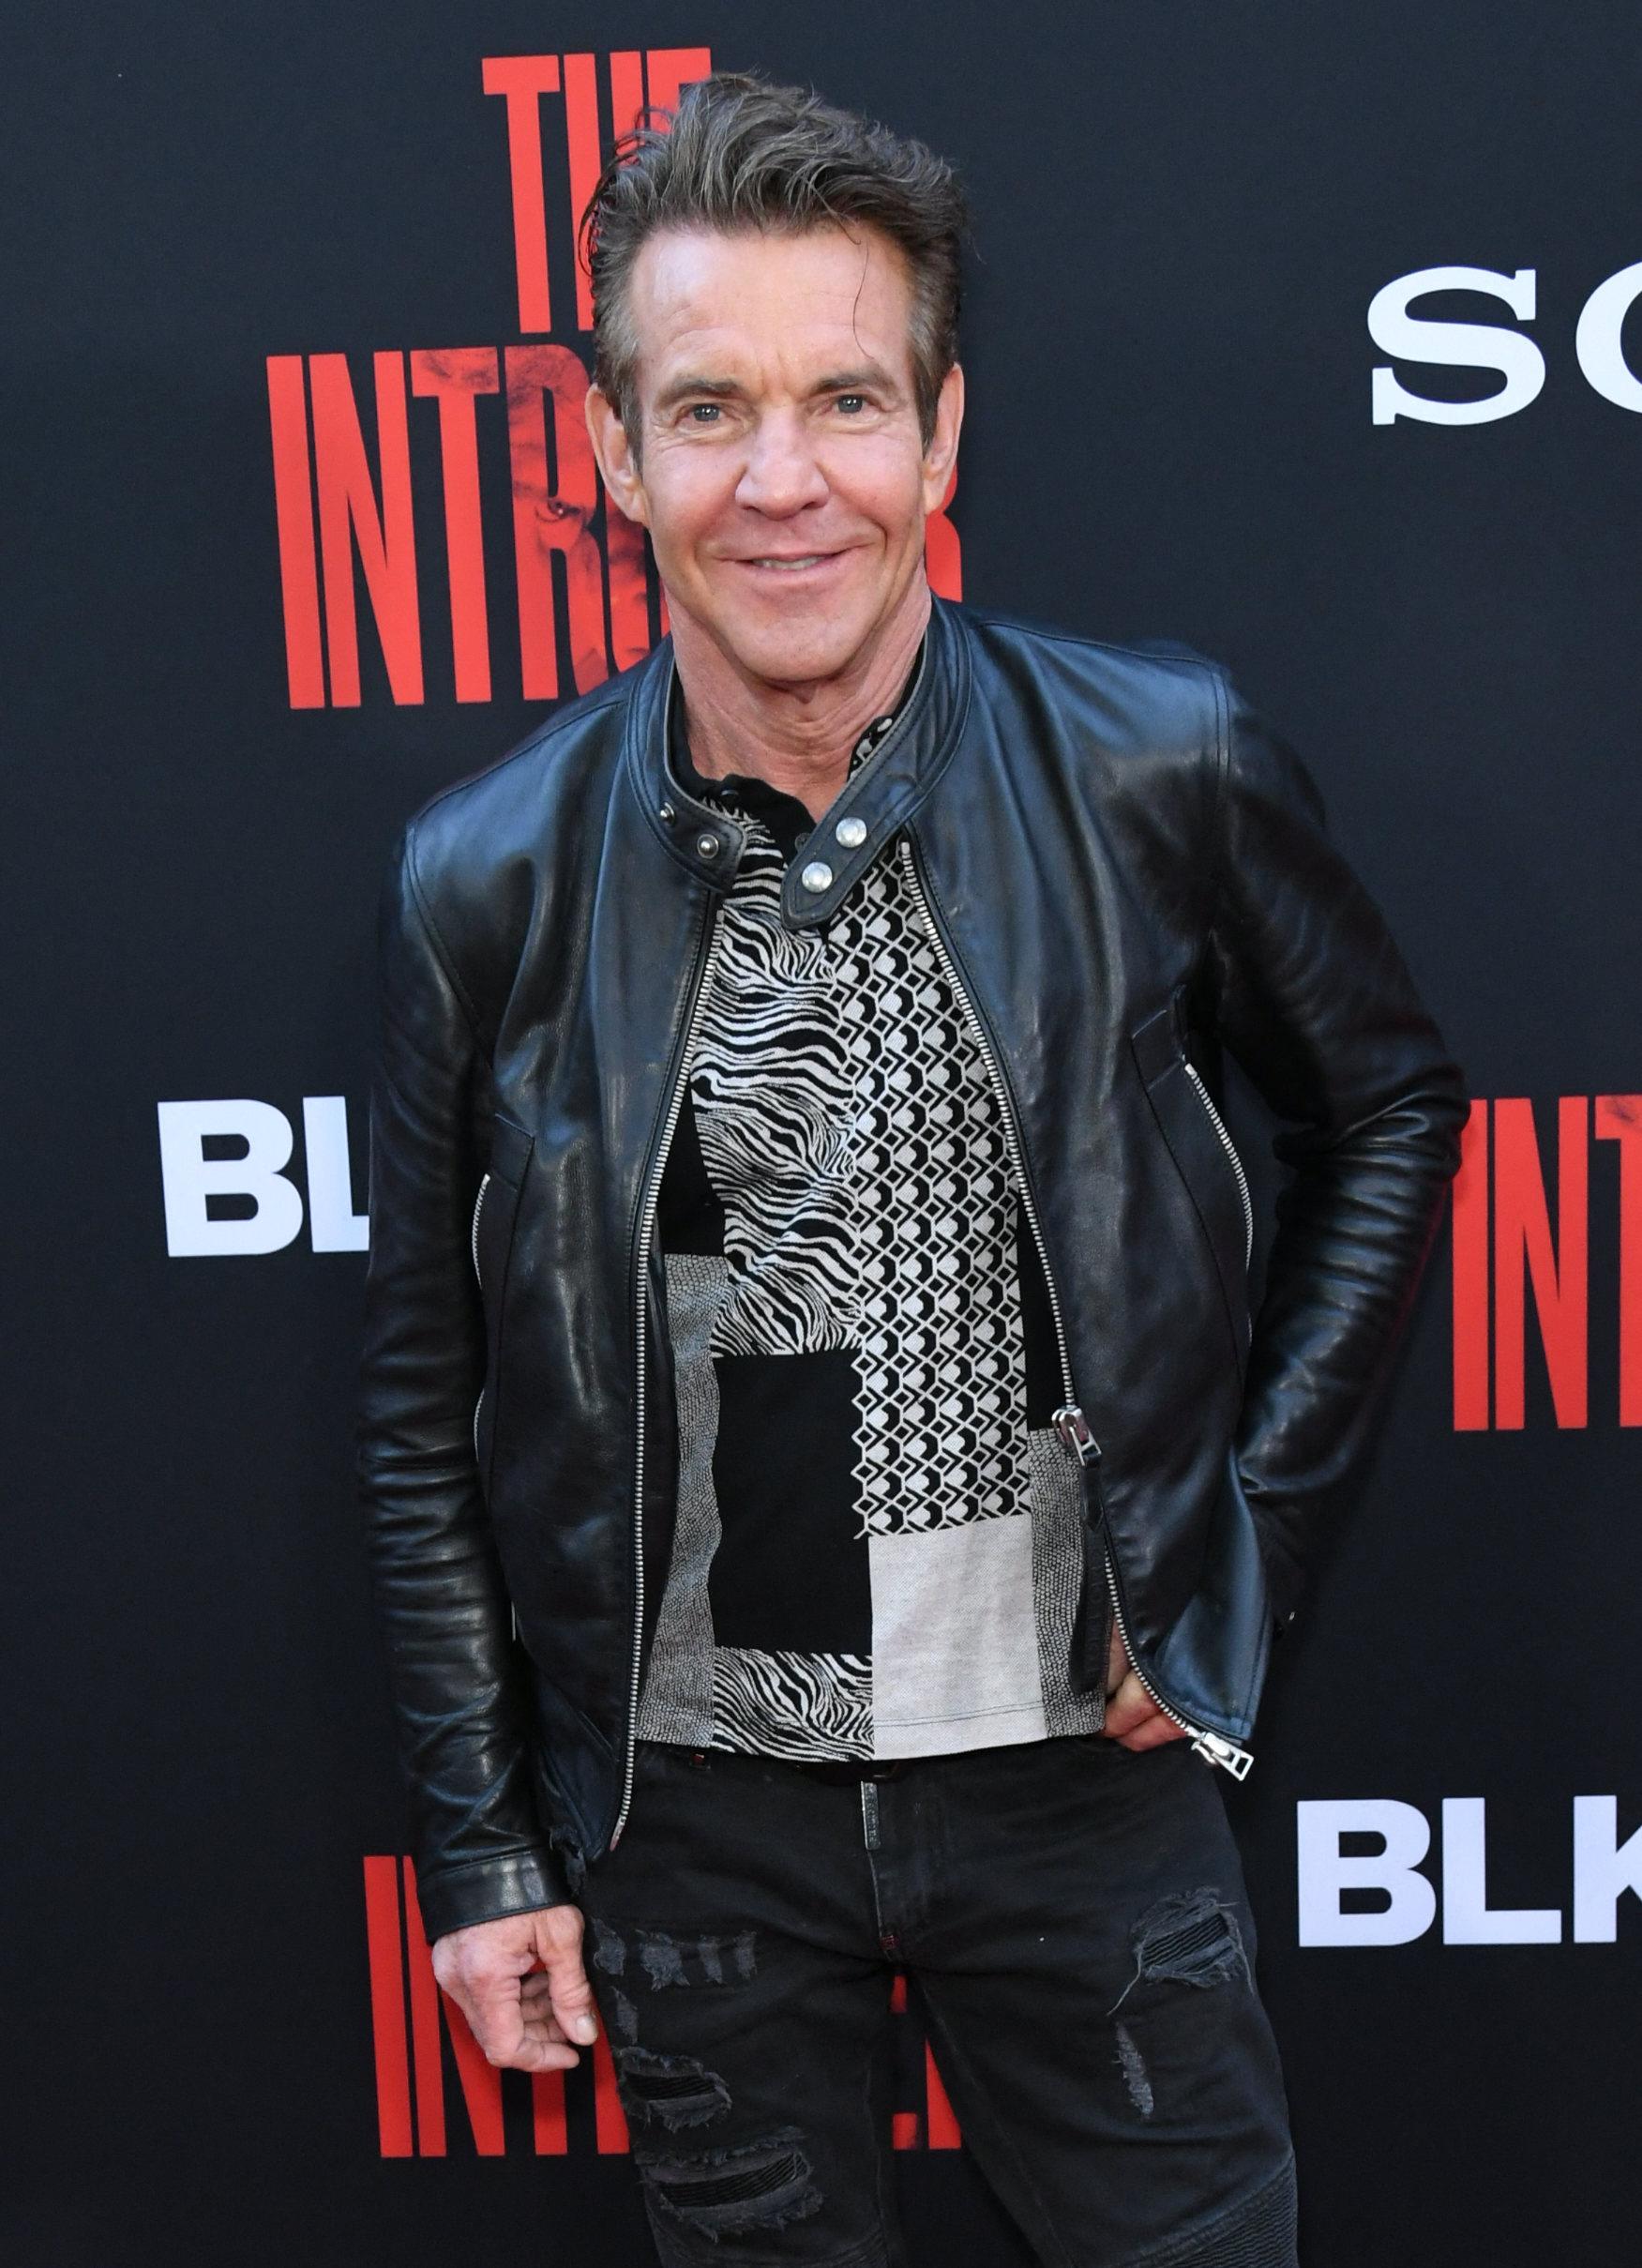 Dennis Quaid Gets Candid About Past Cocaine Addiction And A 'White Light Experience' That Led Him To Rehab